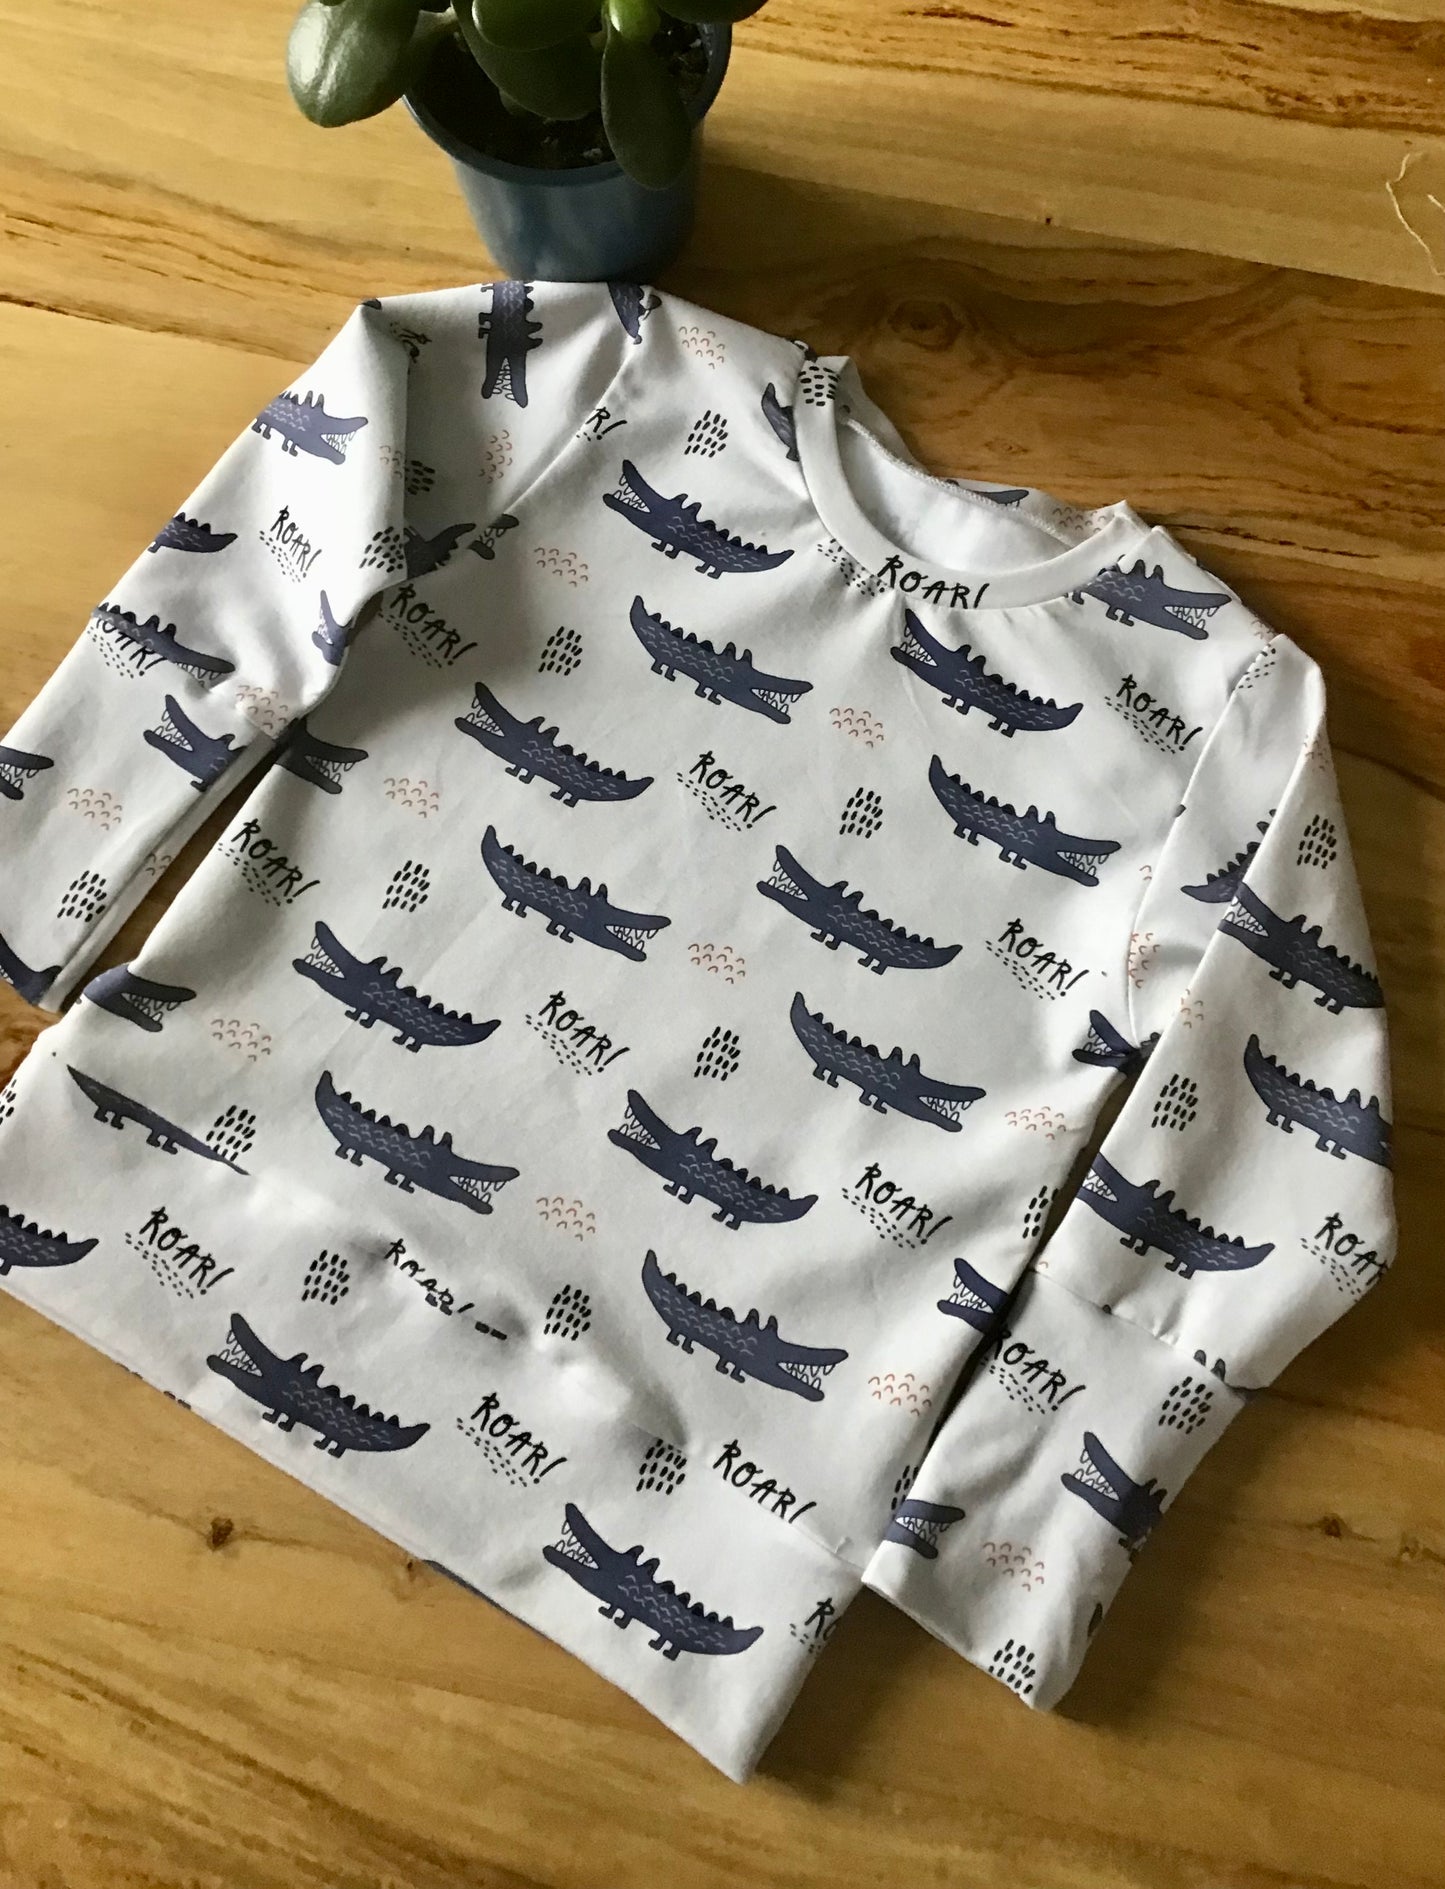 Evolutionary hoodie crocodiles ready to go gr: 6 to 36 months